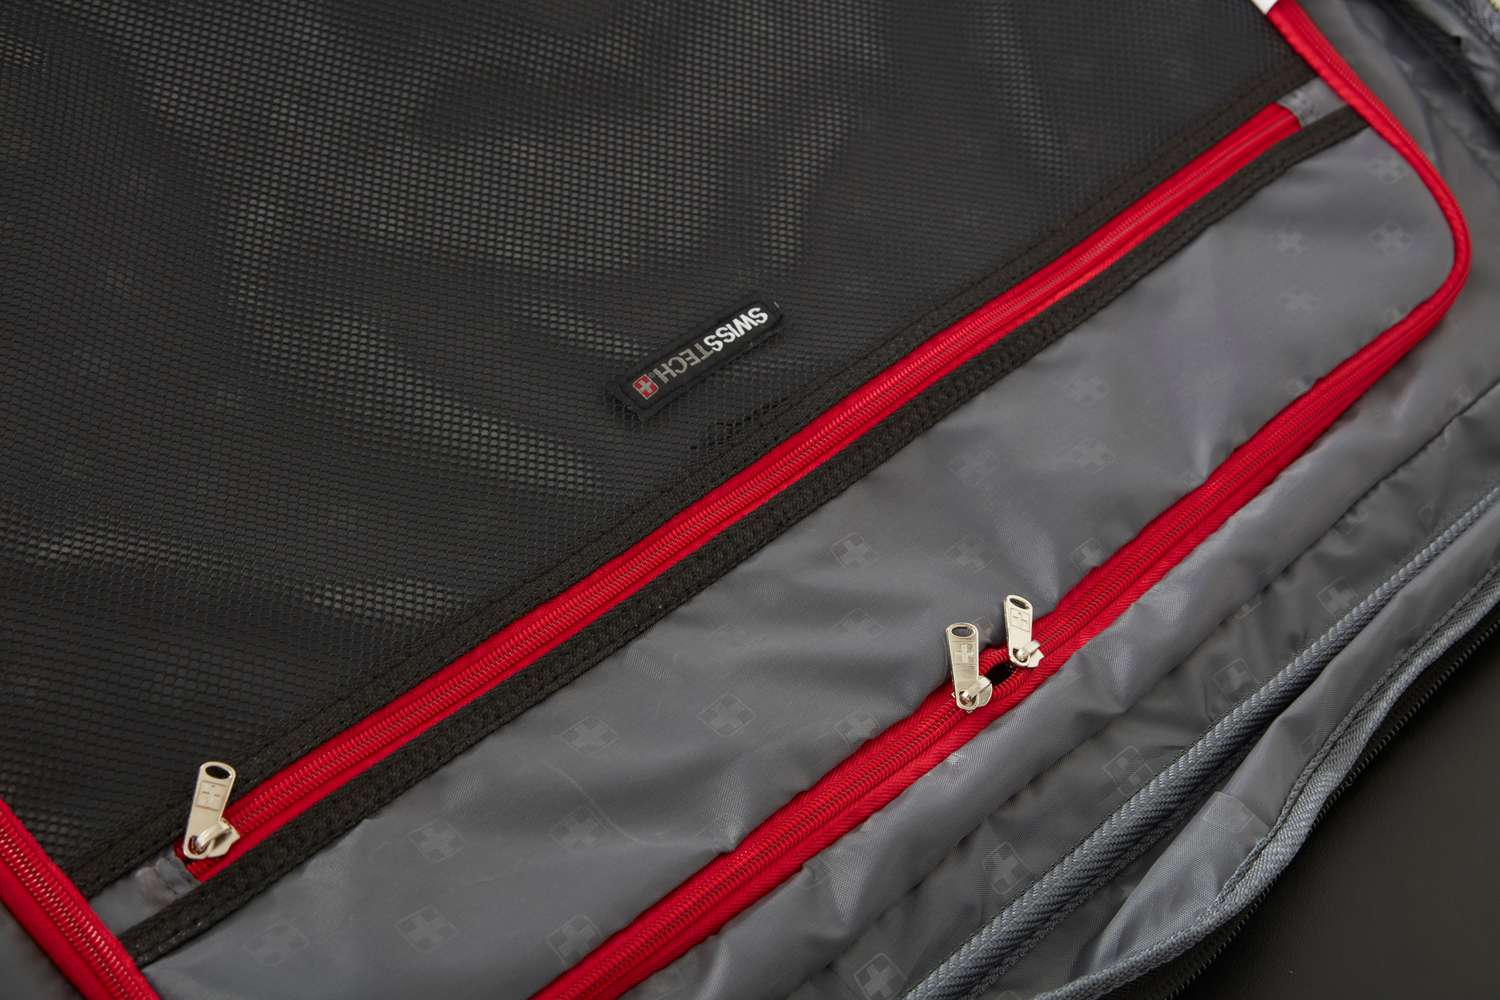 A close-up of the zippers on the SwissTech Executive 29-Inch Softside Luggage.